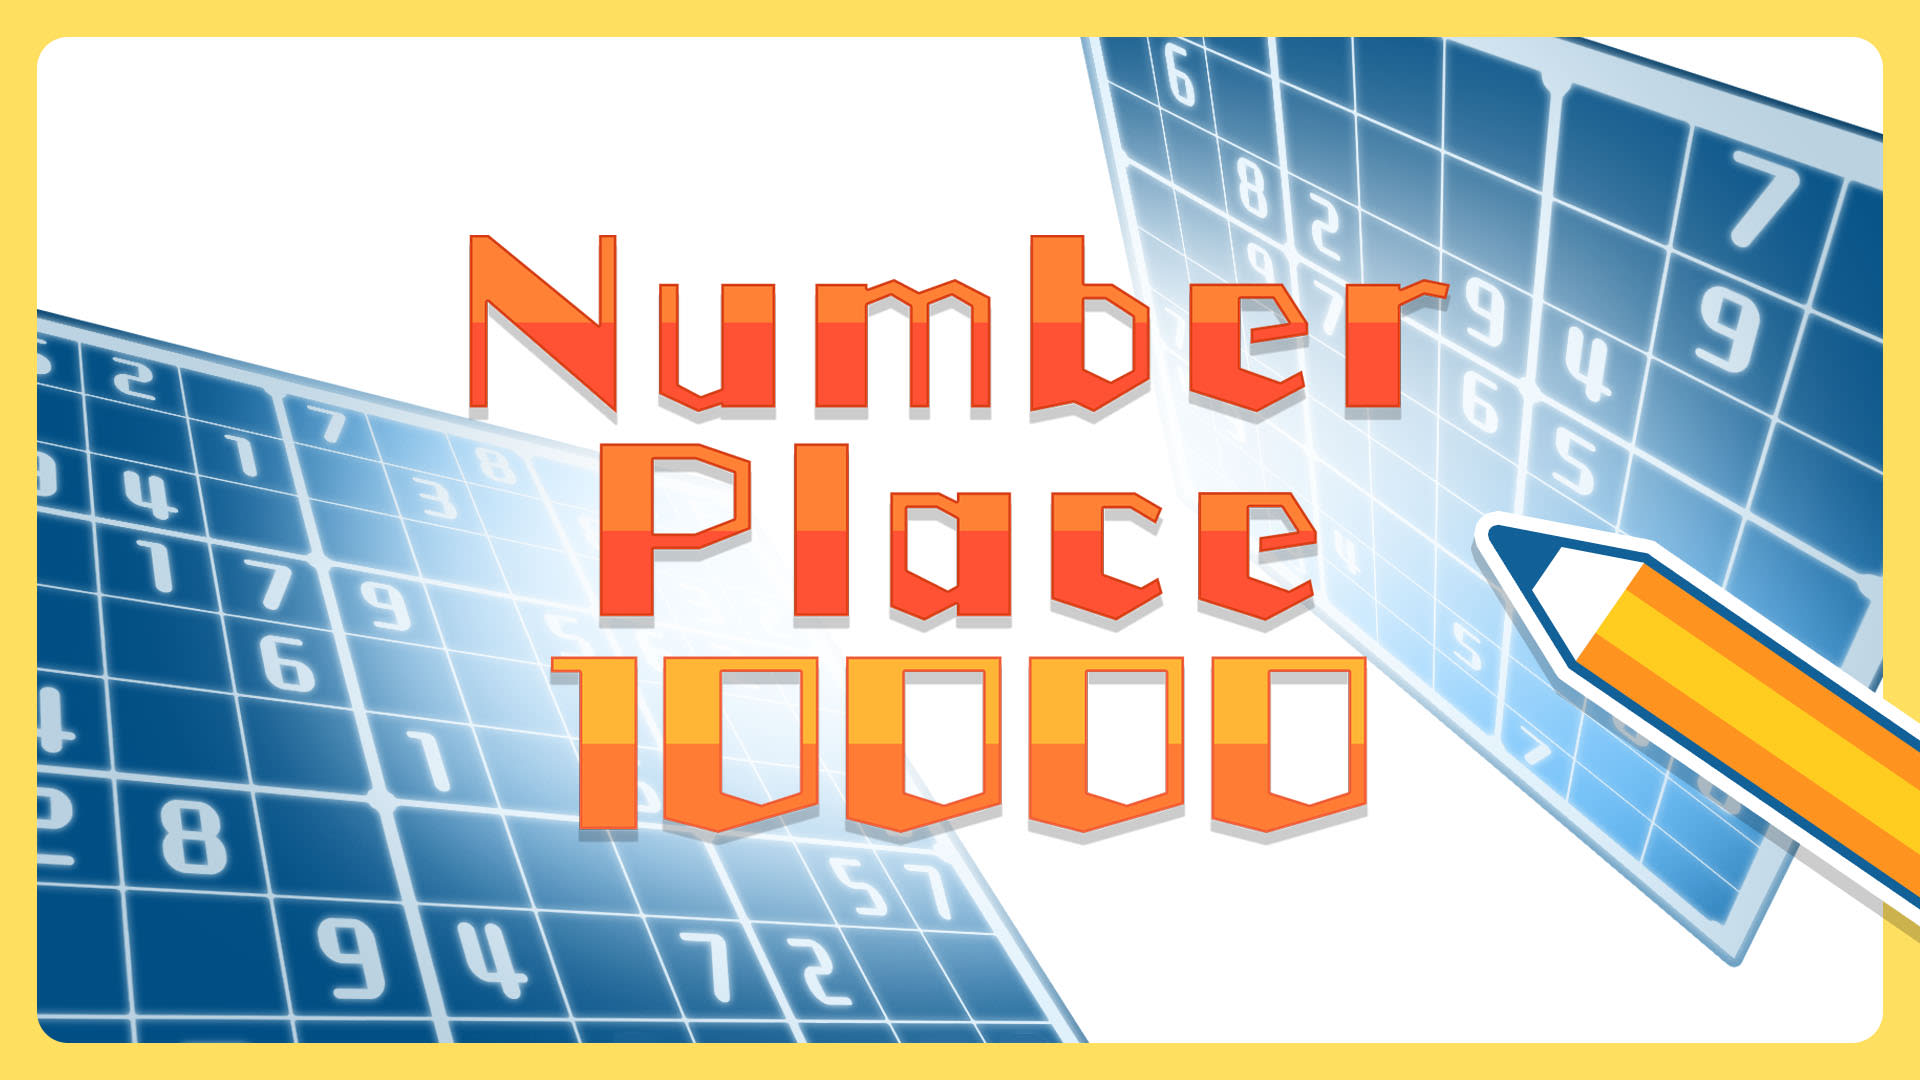 Number Place 10000